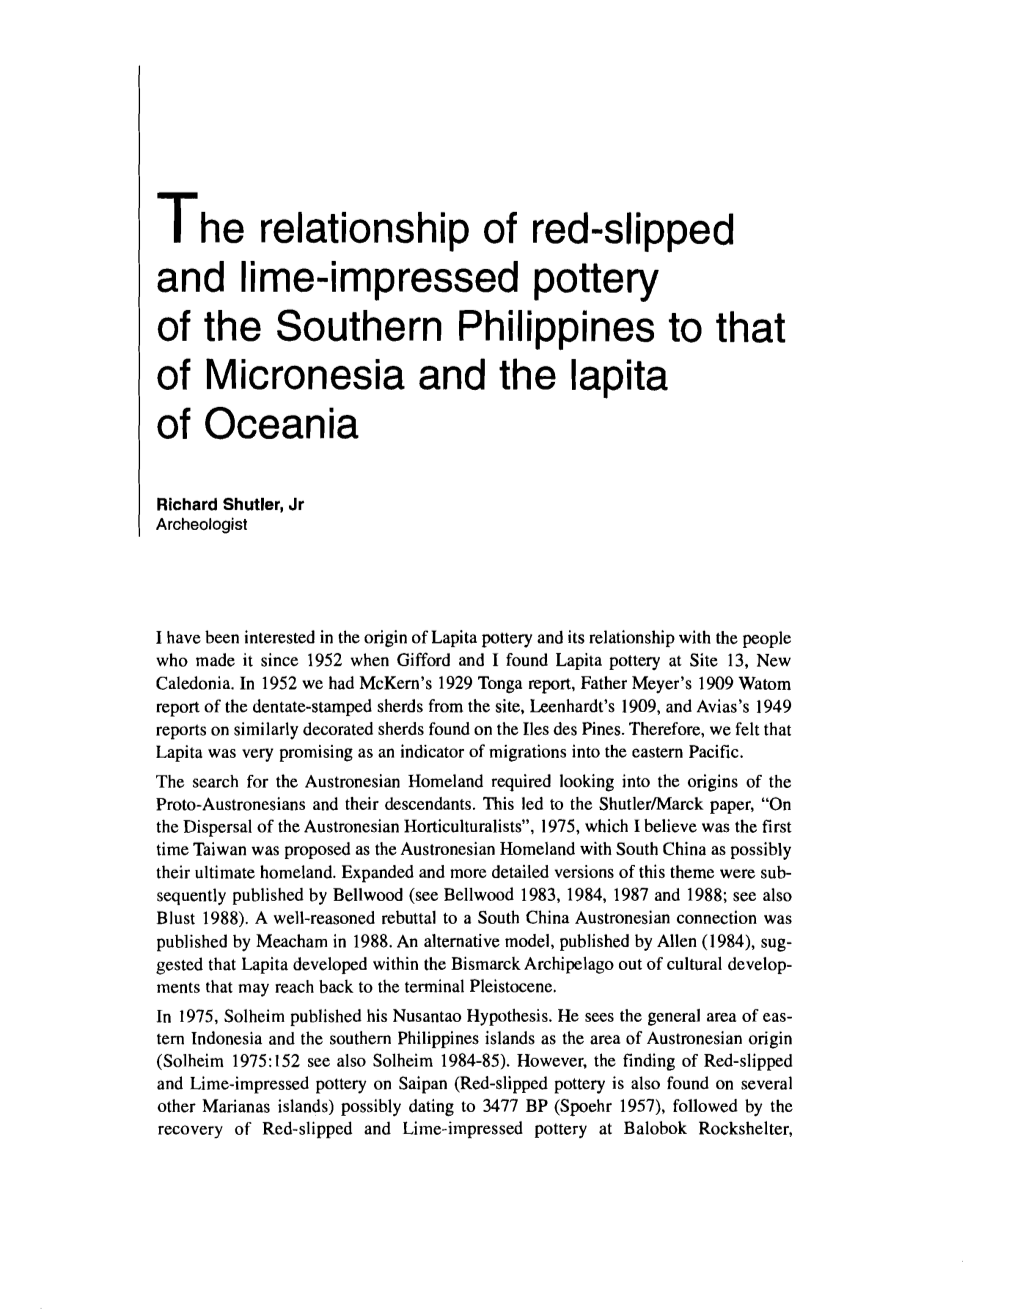 The Relationship of Red-Slipped and Lime-Impressed Pottery of the Southern Philip~Ines V 523